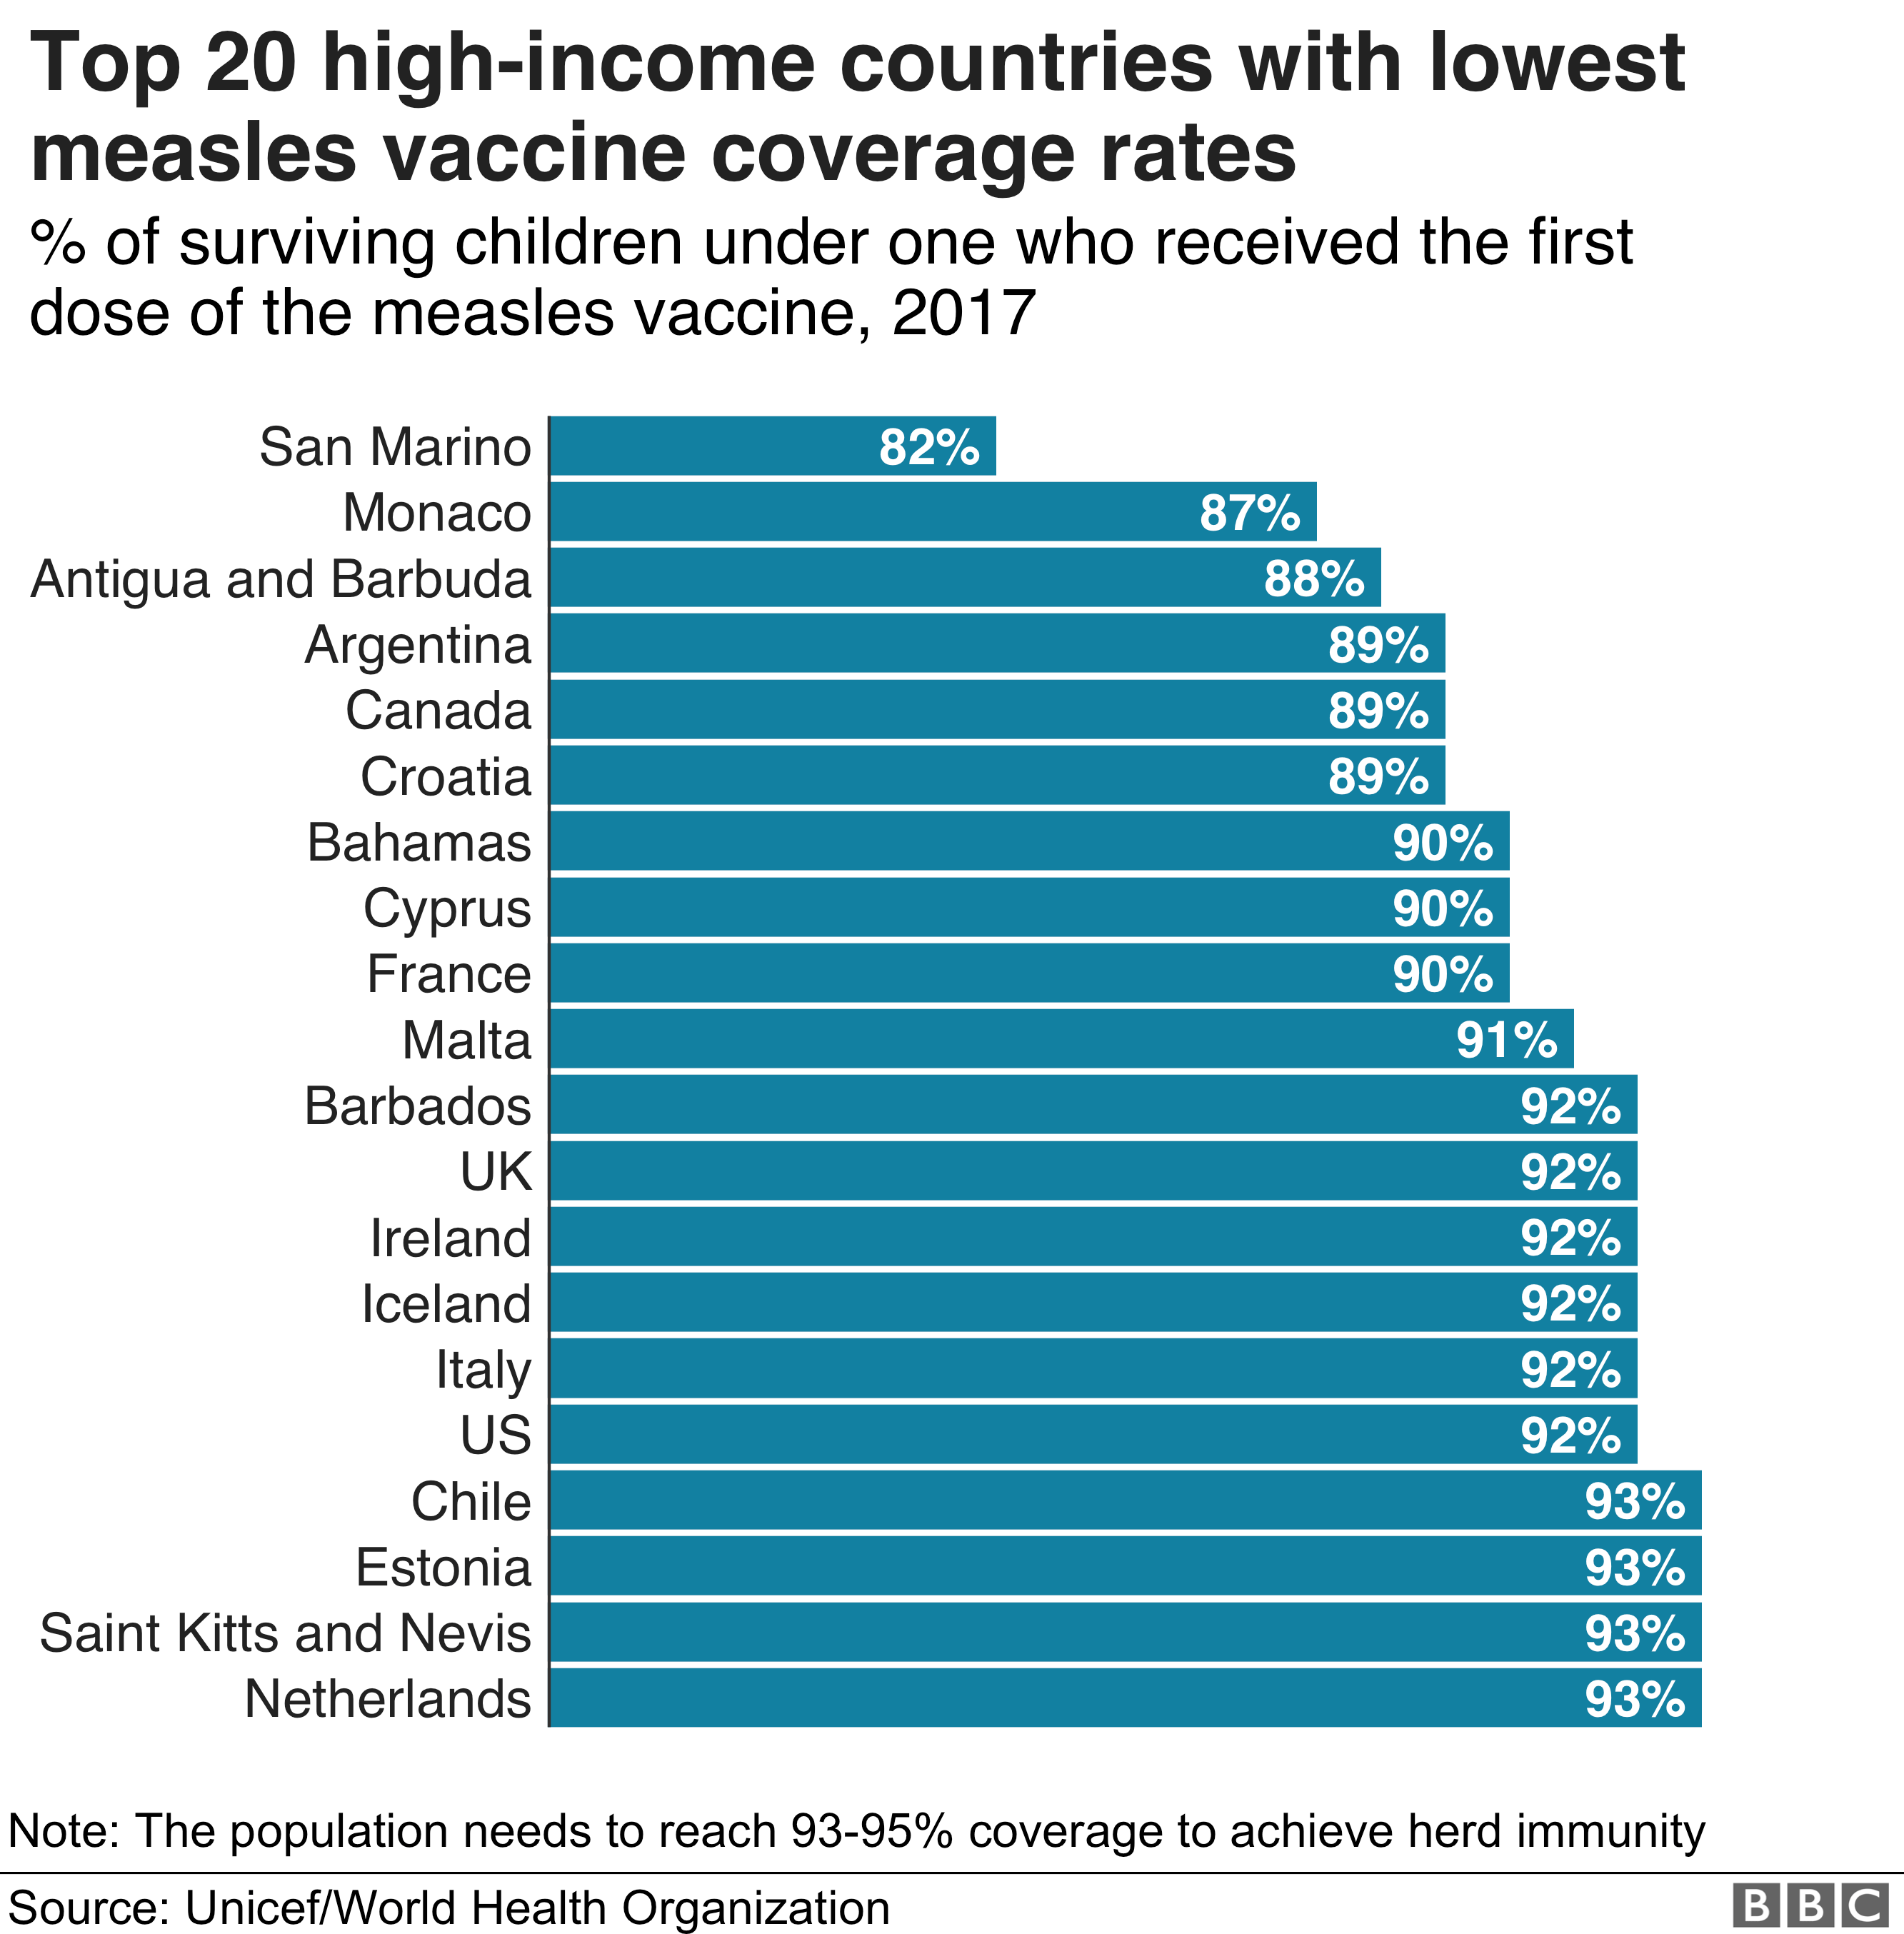 Chart showing the top 20 high-income countries' measles vaccination coverage rates